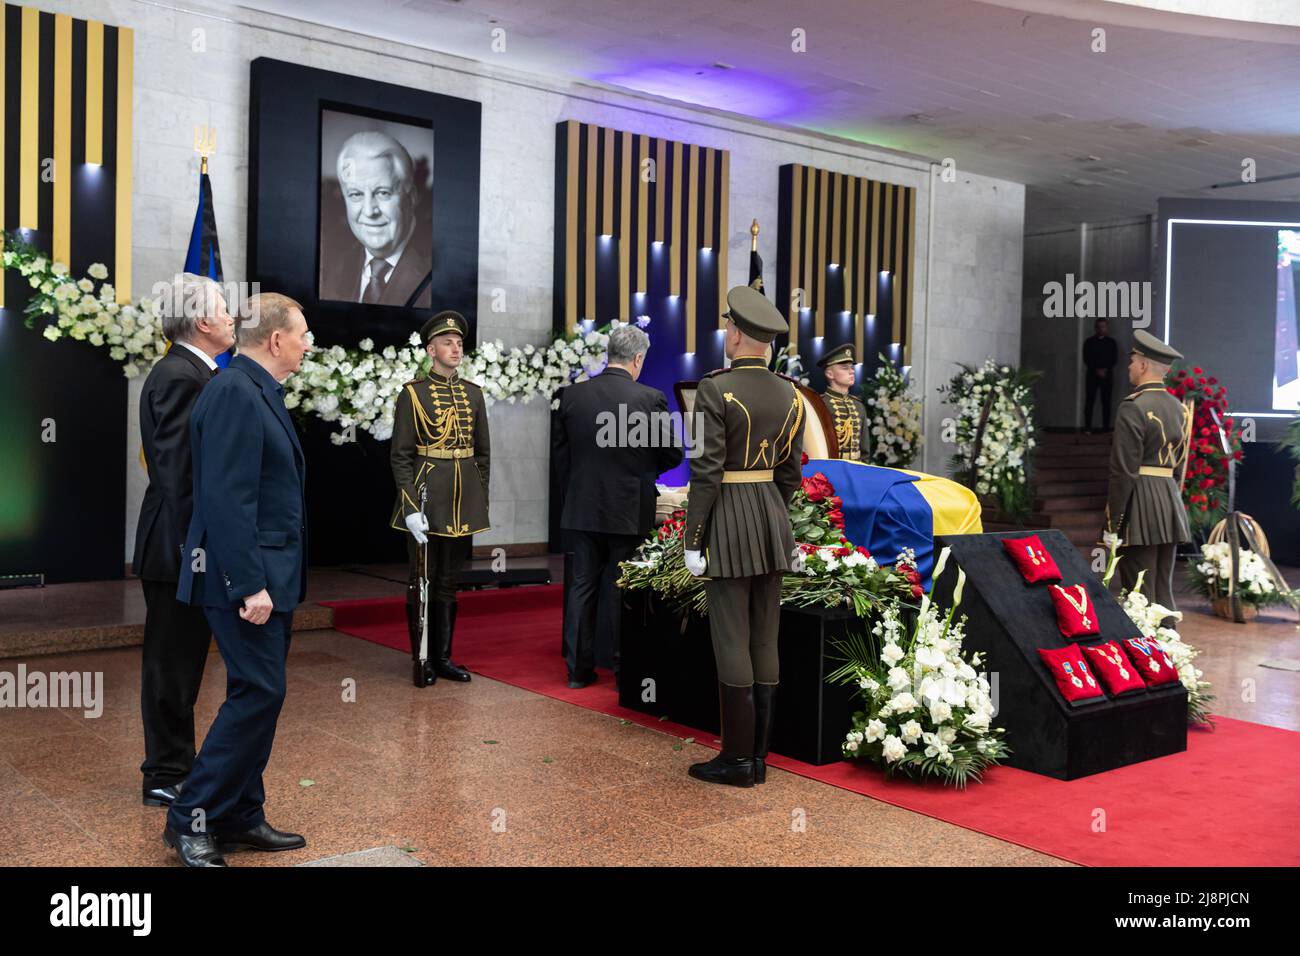 Kyiv, Ukraine. 17th May, 2022. Presidents of Ukraine of previous years Viktor Yushchenko (L) and Leonid Kuchma (L2), attend during the farewell ceremony. The first president of independent Ukraine, Leonid Kravchuk said goodbye in Kyiv. The farewell ceremony took place in the 'Ukrainian House', located on the European Square in the center of the capital. Credit: SOPA Images Limited/Alamy Live News Stock Photo